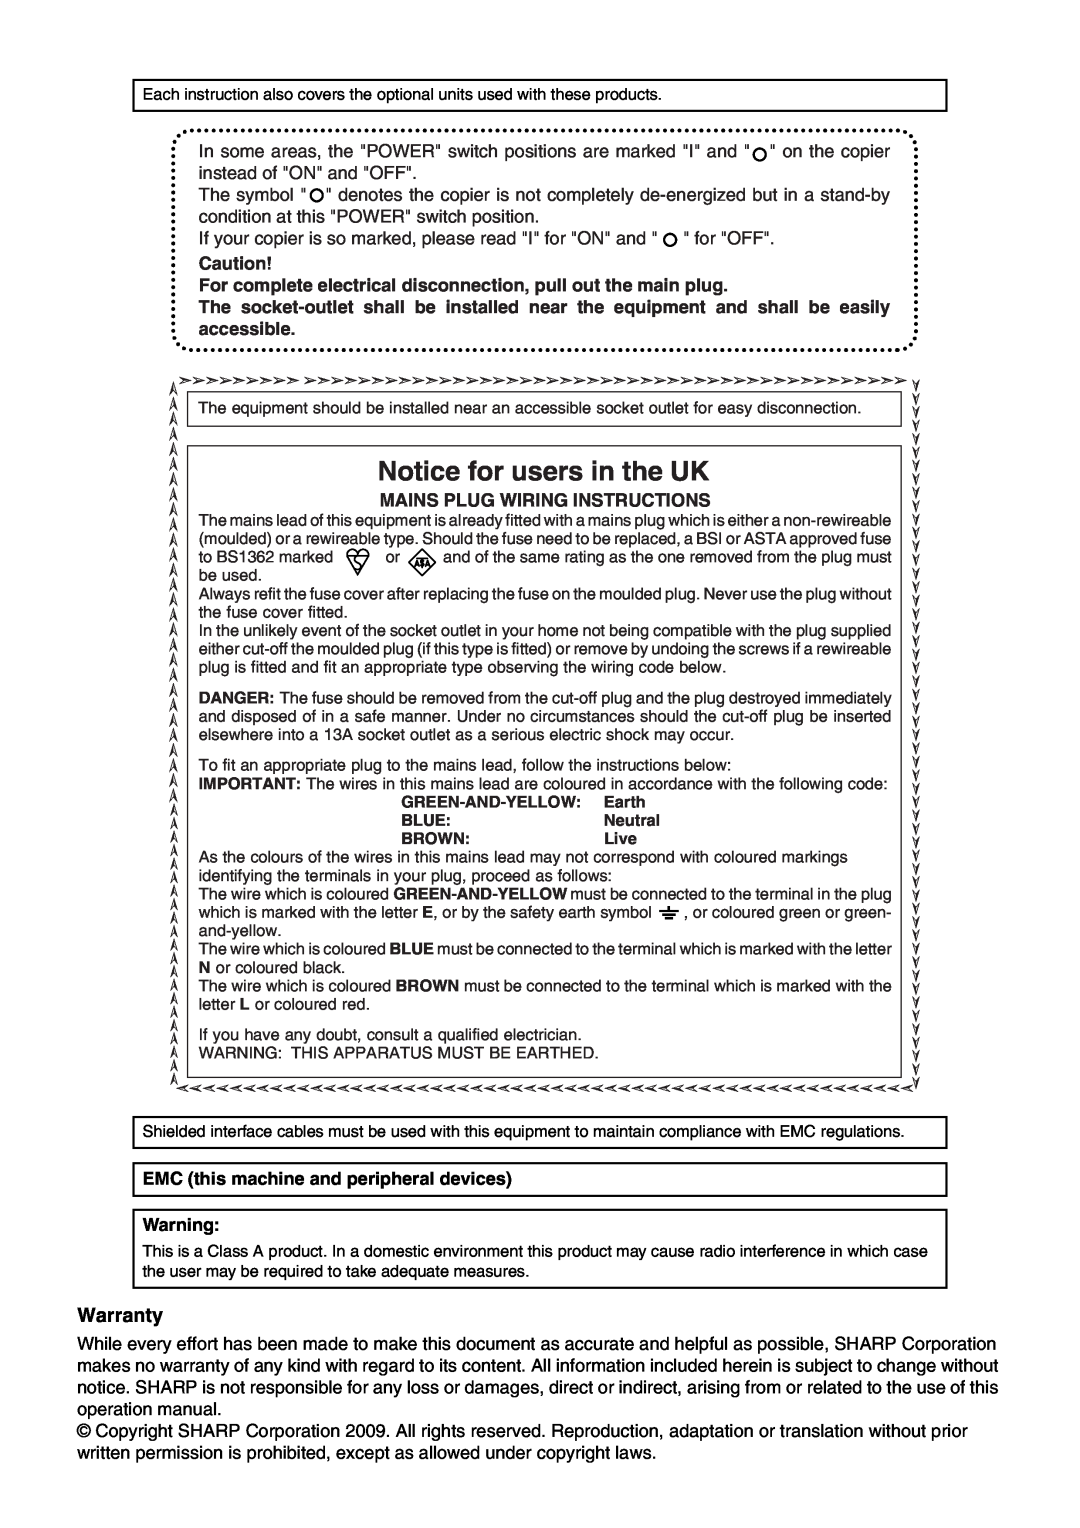 Sharp MX-M160D, MX-M200D operation manual Notice for users in the UK, Warranty 